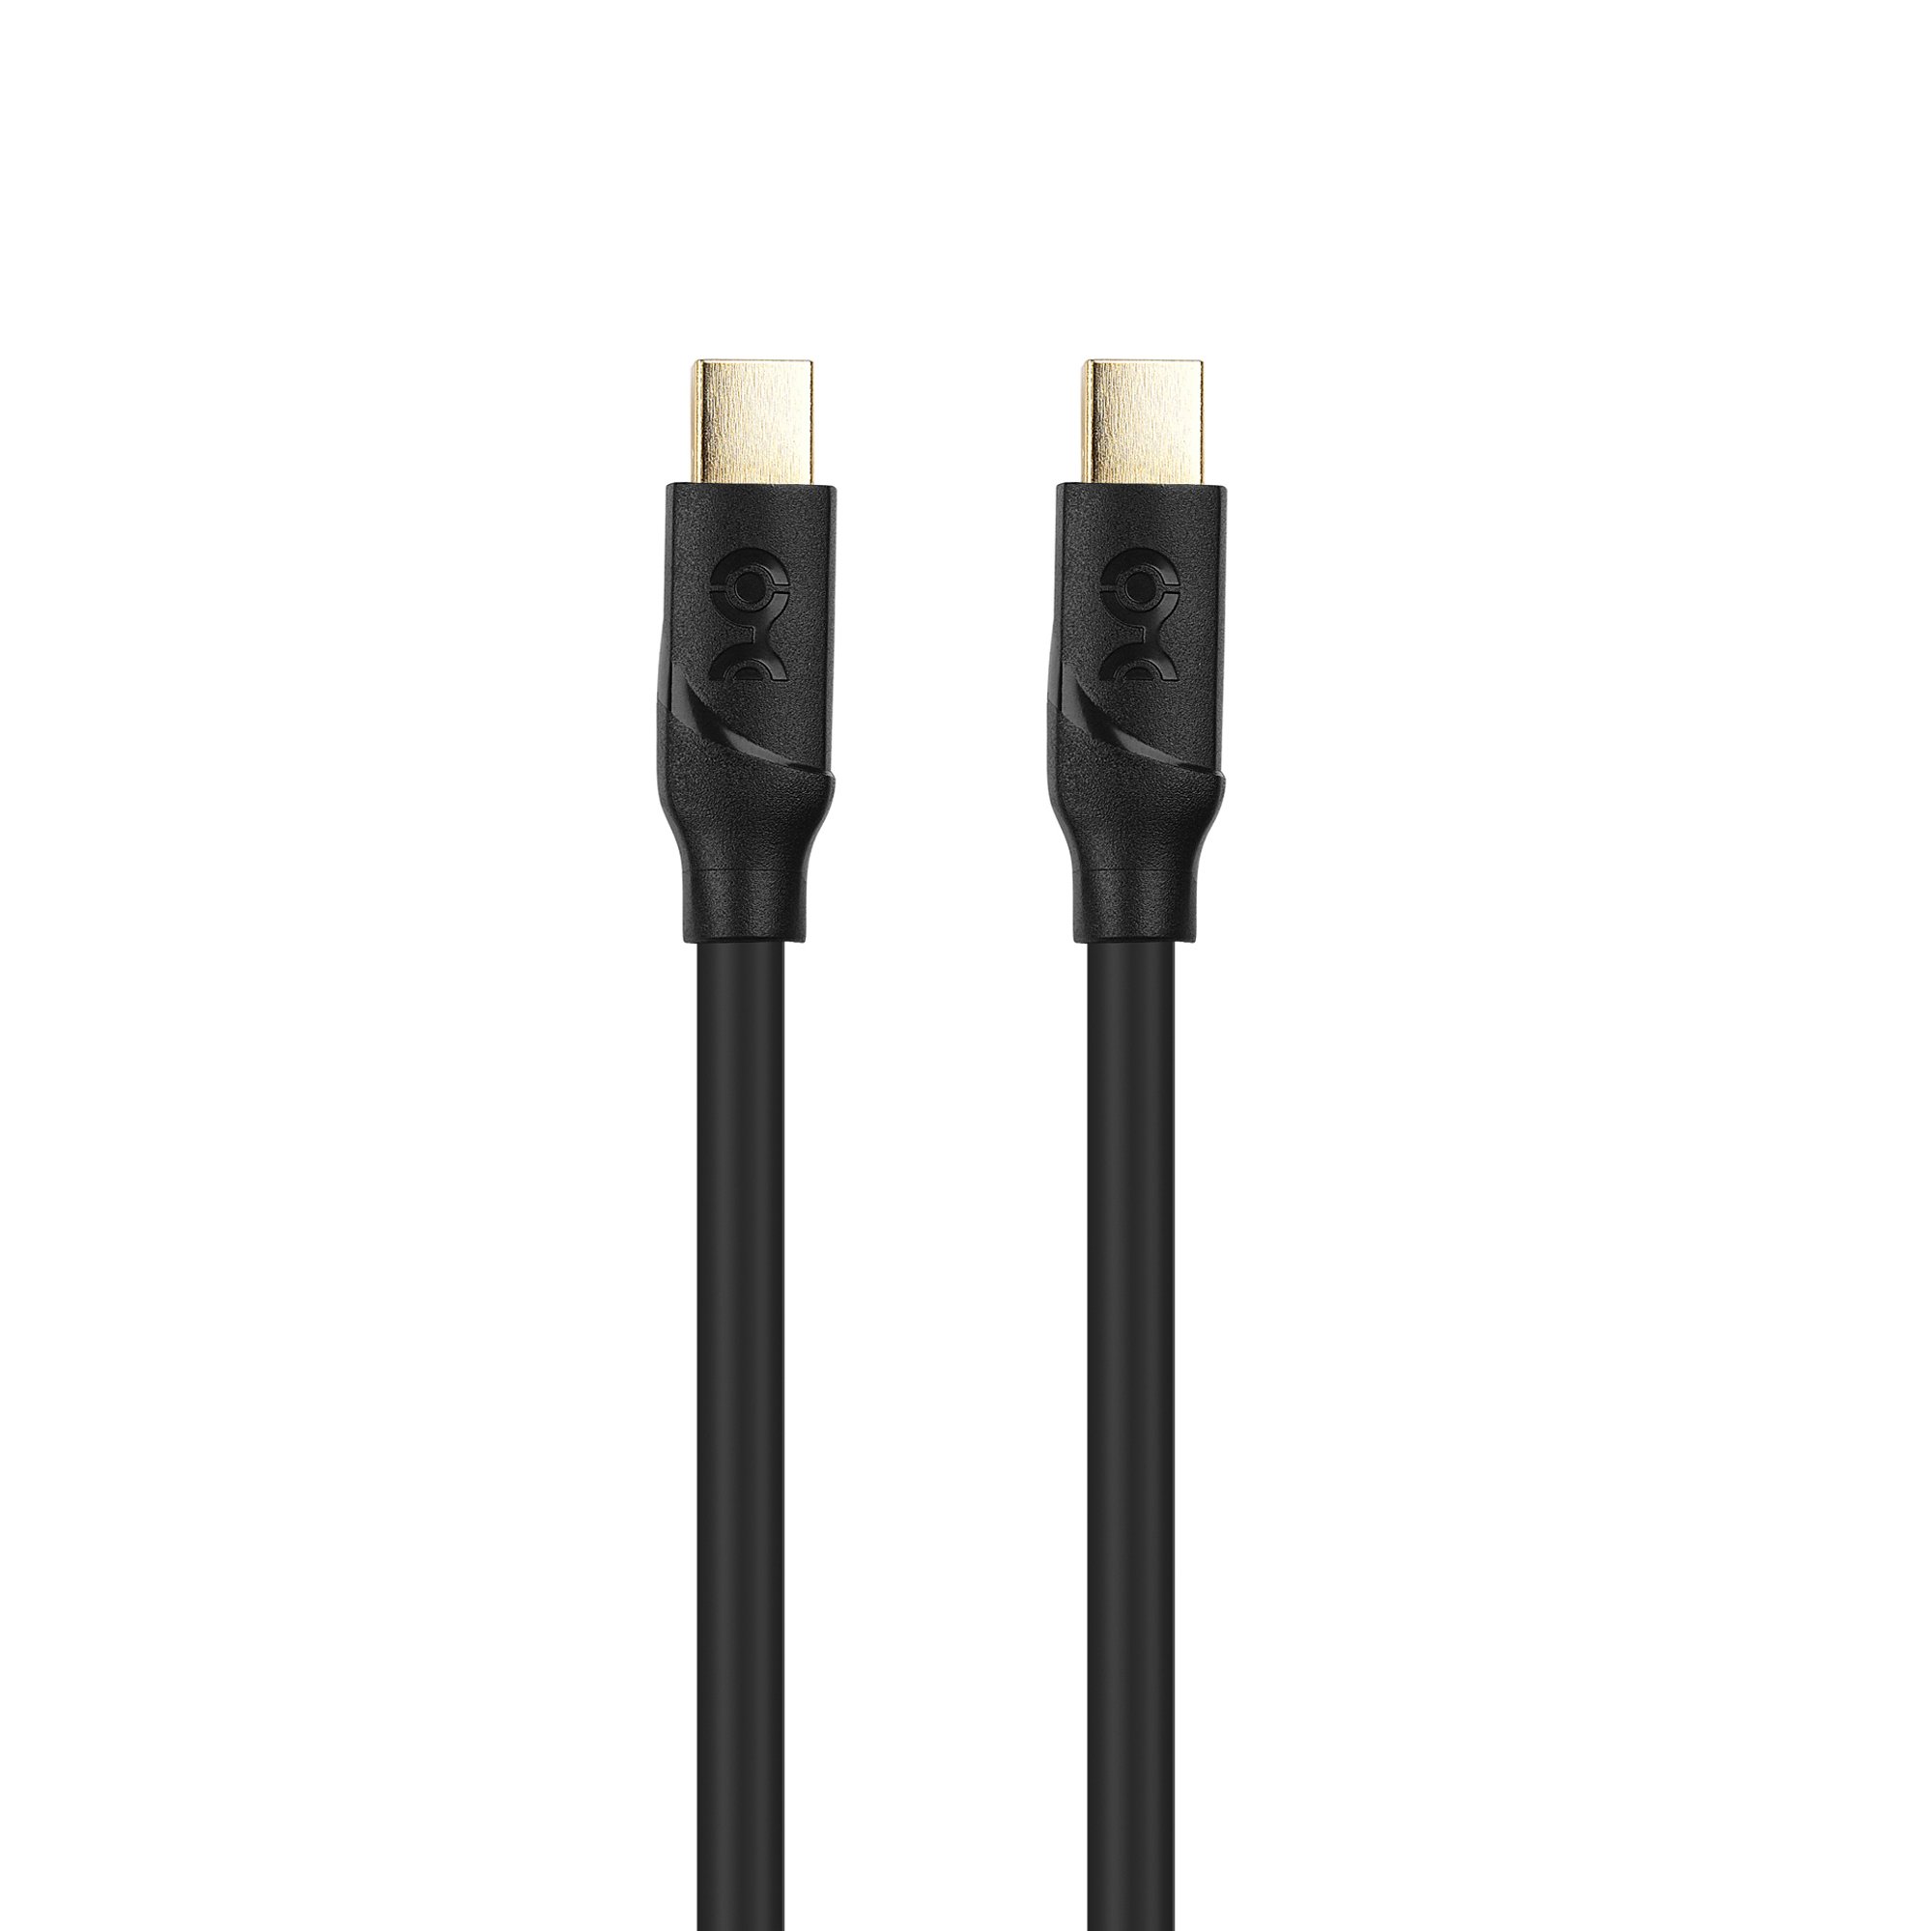 Cable Matters 4K Mini DisplayPort to Mini DisplayPort Cable in Black 6 Feet - Not a Replacement for Thunderbolt Cable, Not Compatible with iMac, Not Support Target Display Mode